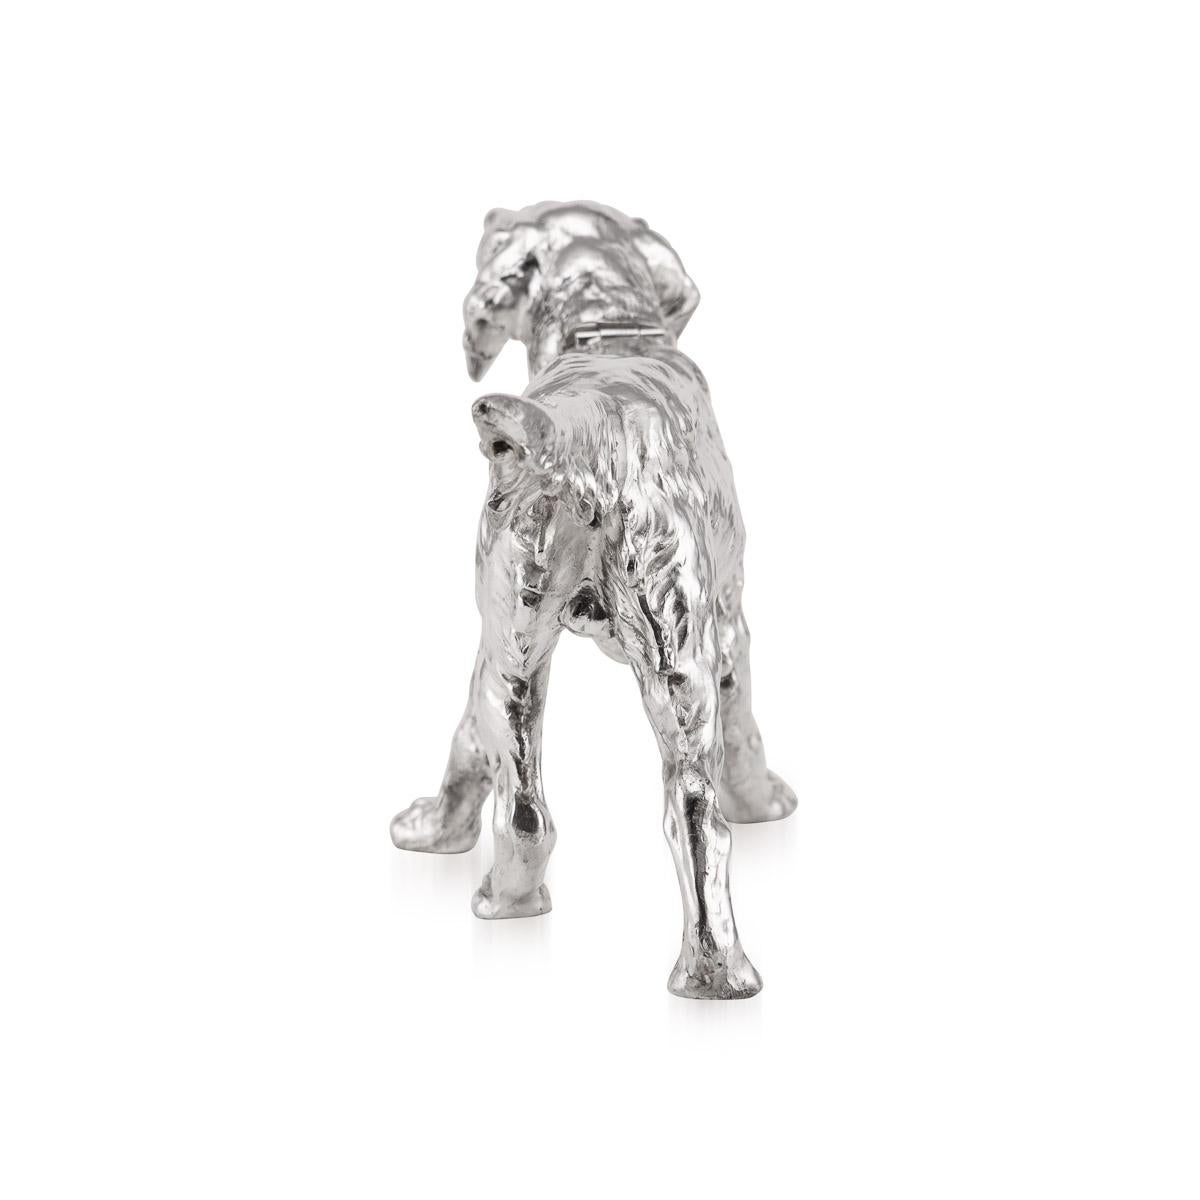 European 20th Century Silver Plated Statue of a Retriever Dog, C.1920 For Sale